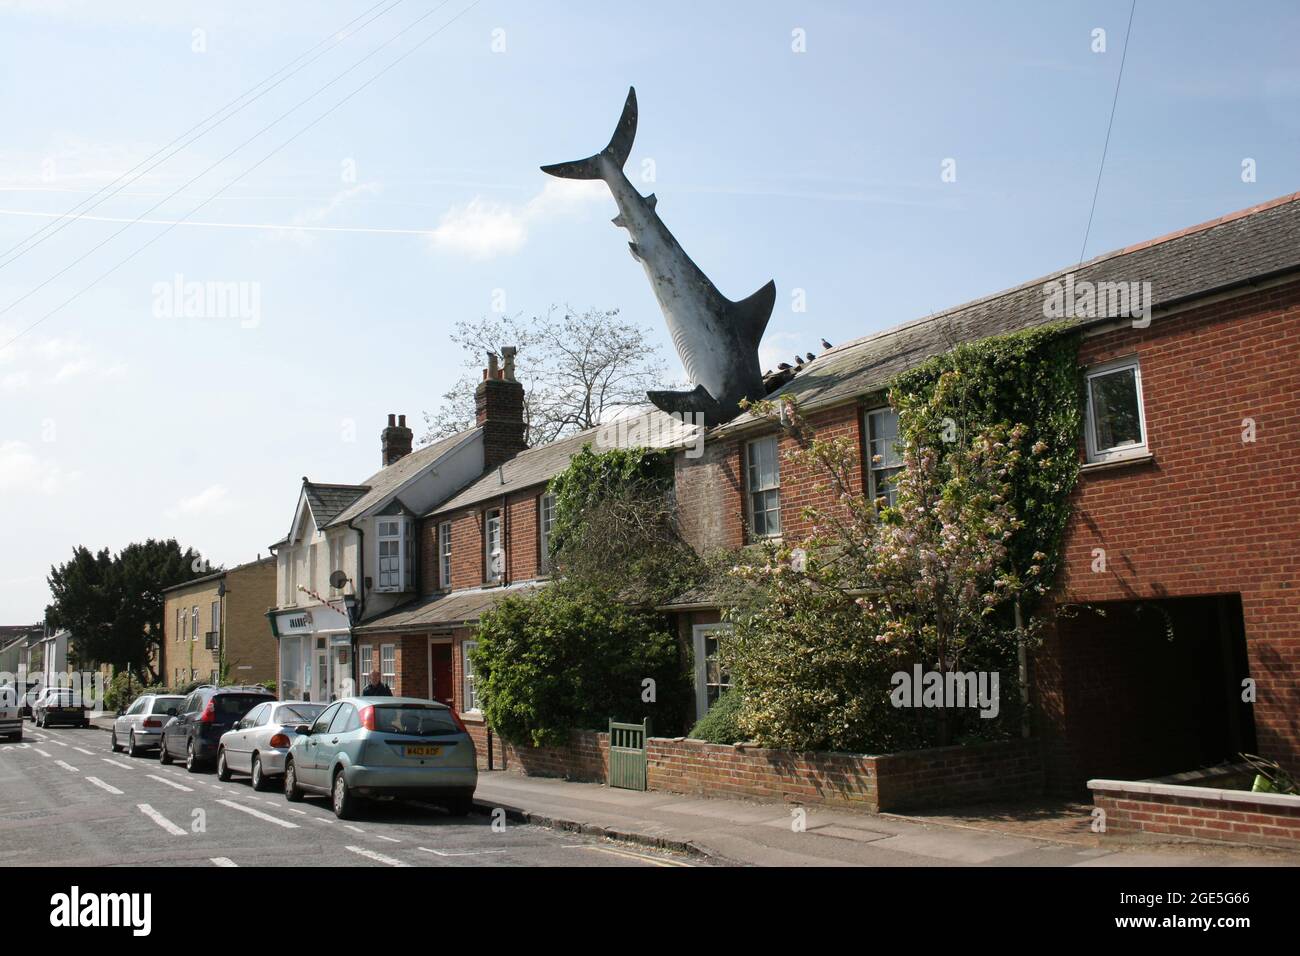 Bill Heine's Shark in a roof statue in Headington, Oxford in the UK Stock  Photo - Alamy